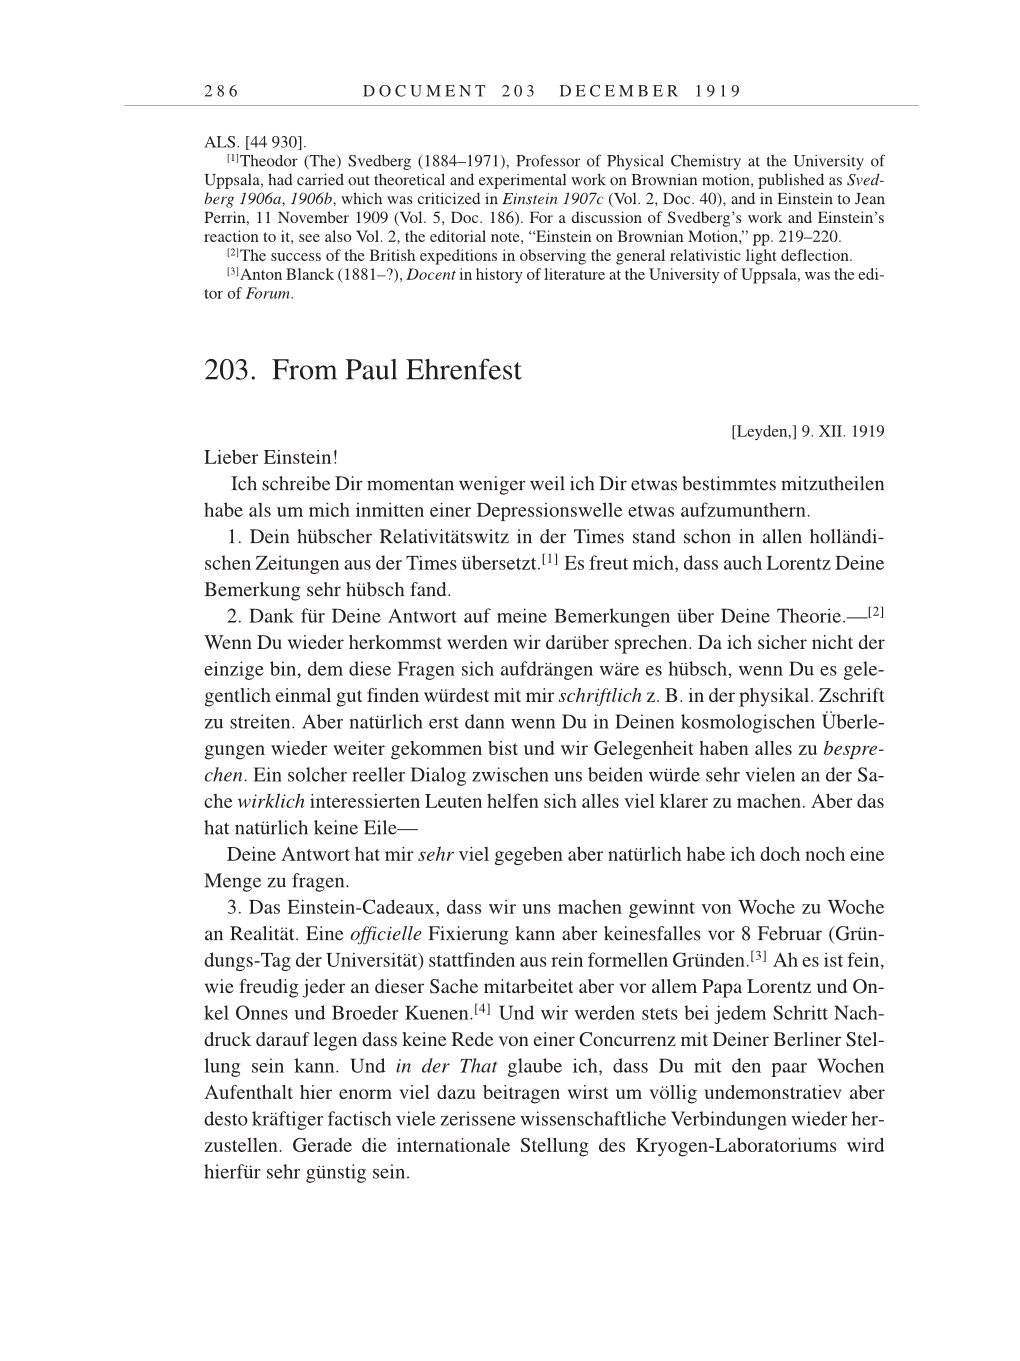 Volume 9: The Berlin Years: Correspondence January 1919-April 1920 page 286